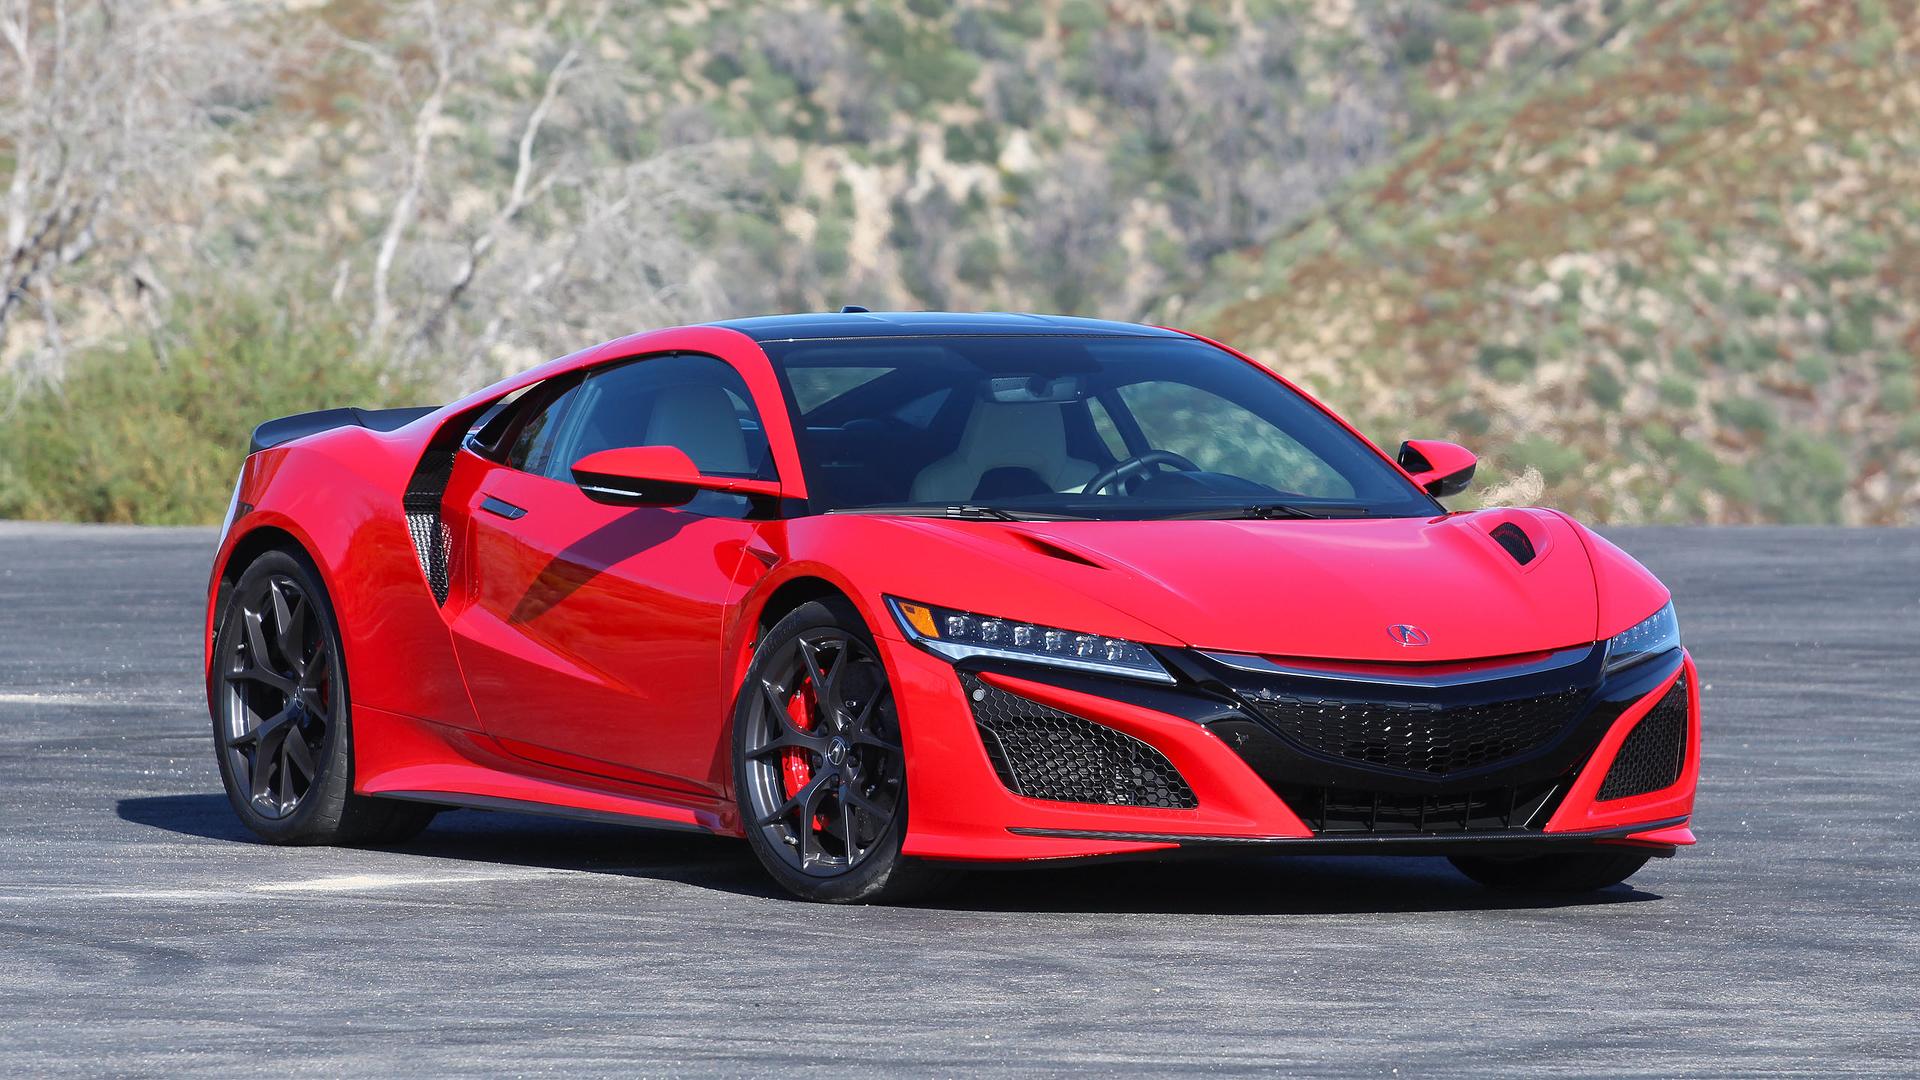 2017 Acura NSX Review: Every Day And Twice On Sundays